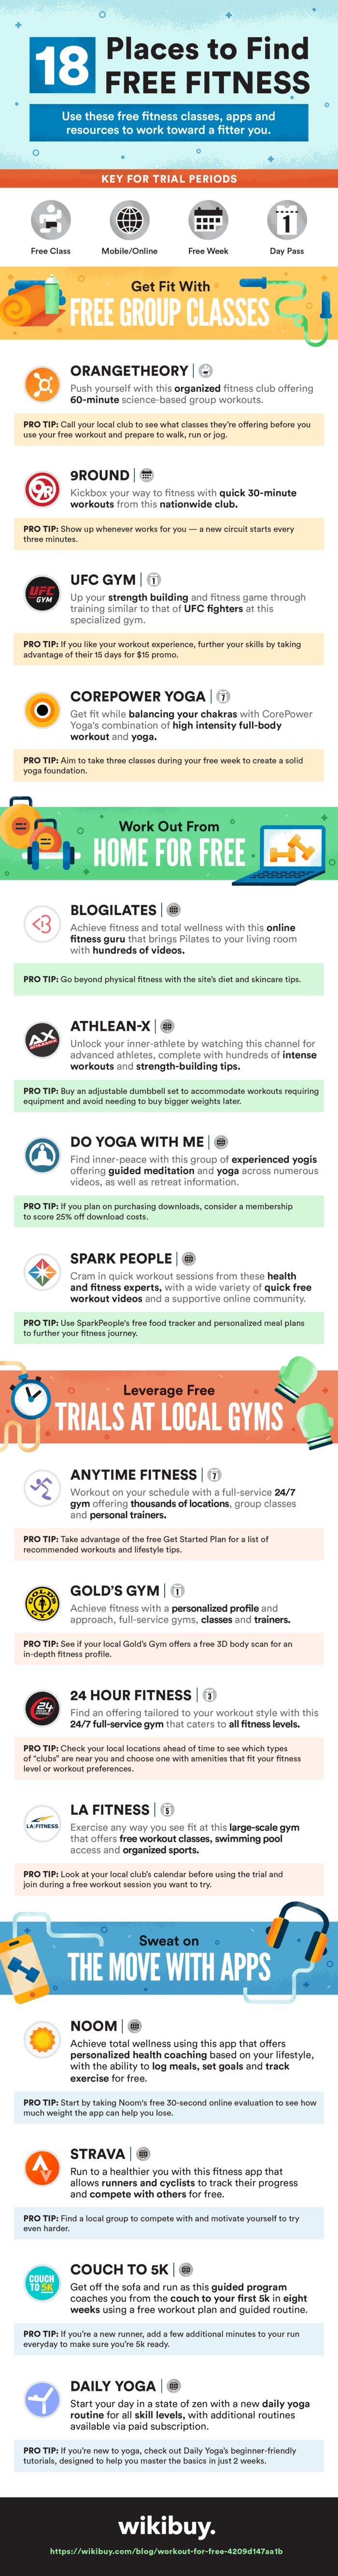 18 Places to Find Free Fitness